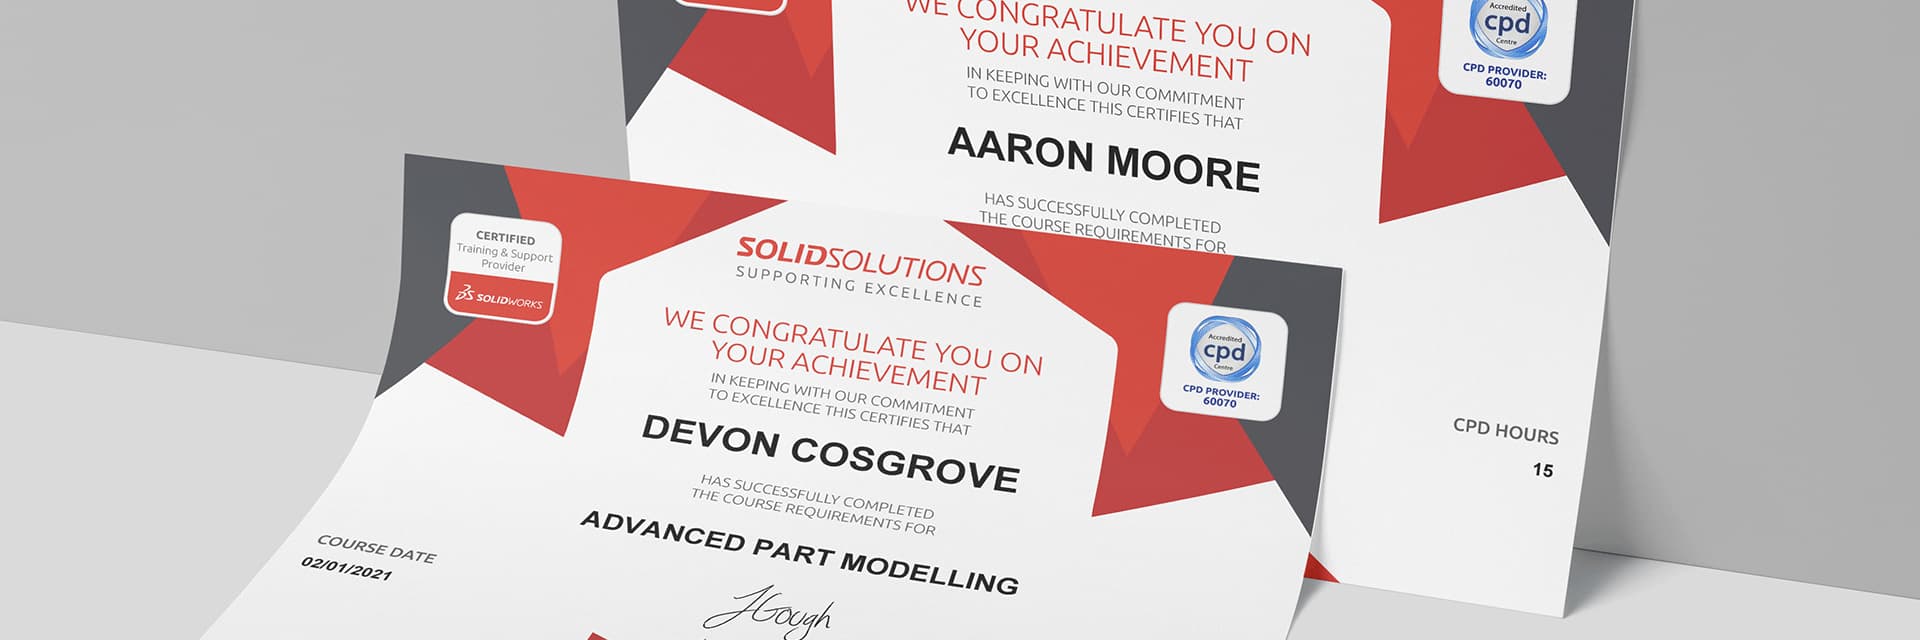 how to pass solidworks certification